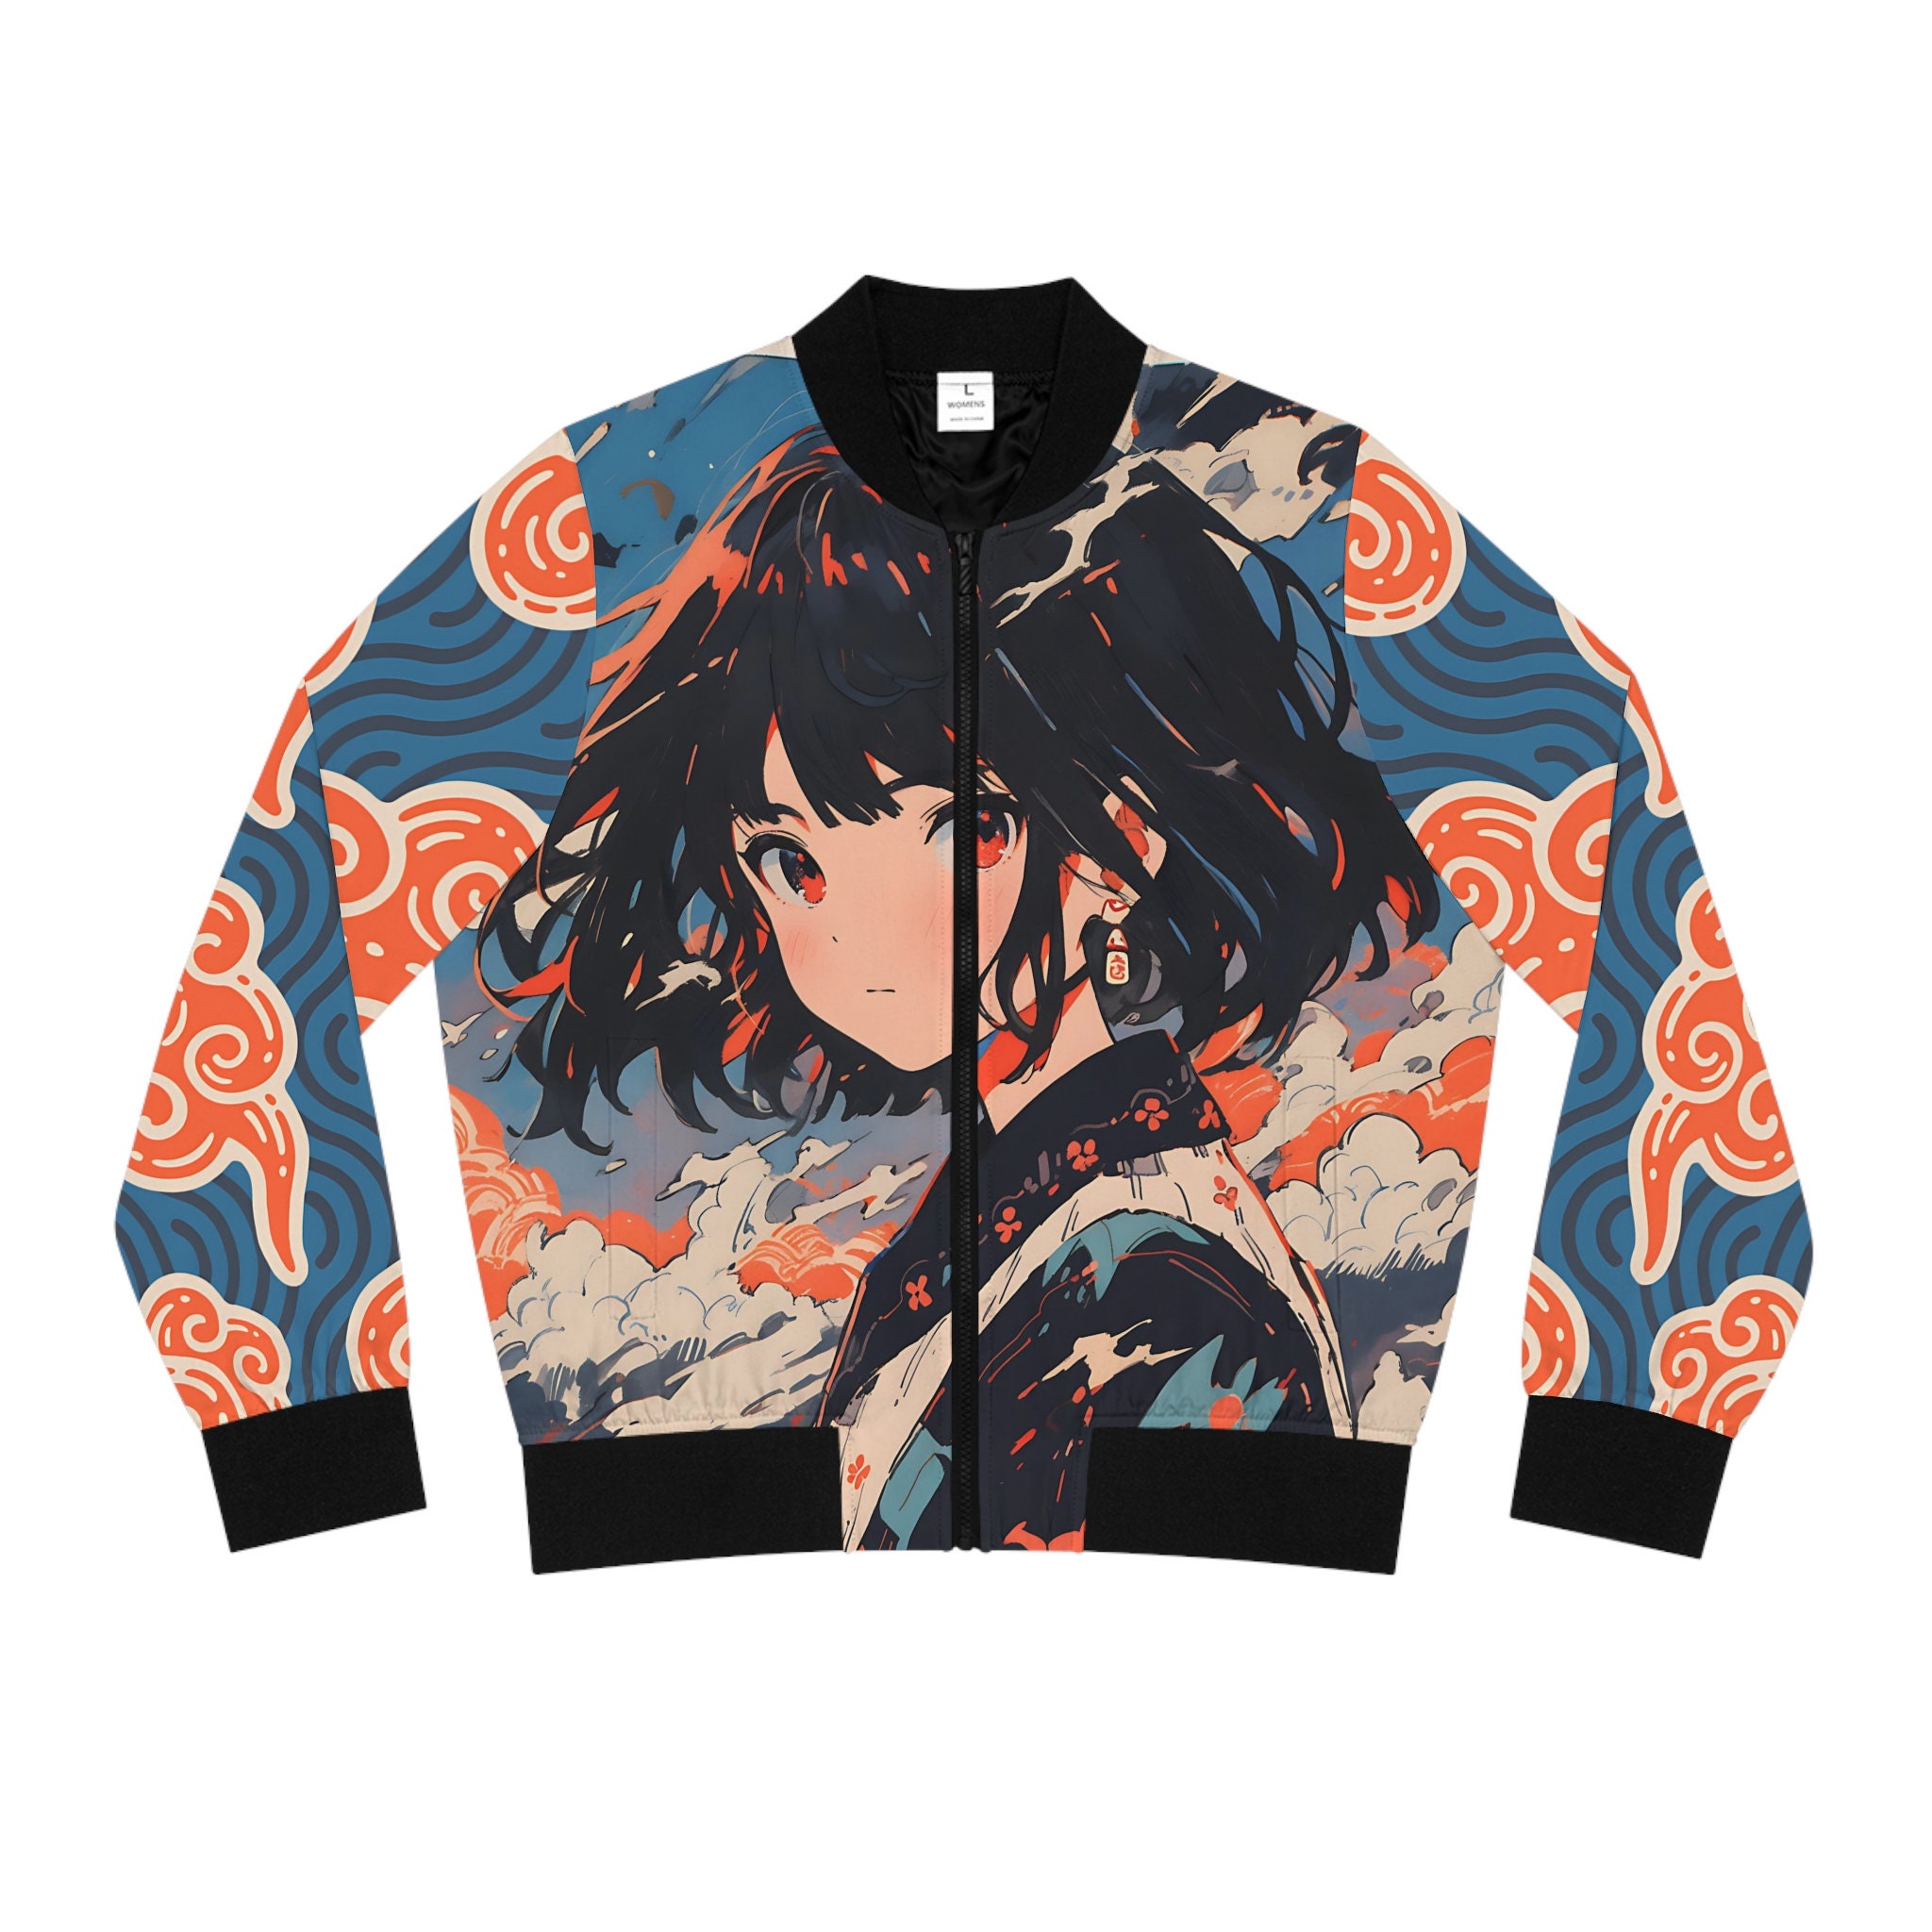 Discover Women's Bomber Jacket Anime Orange Clouds